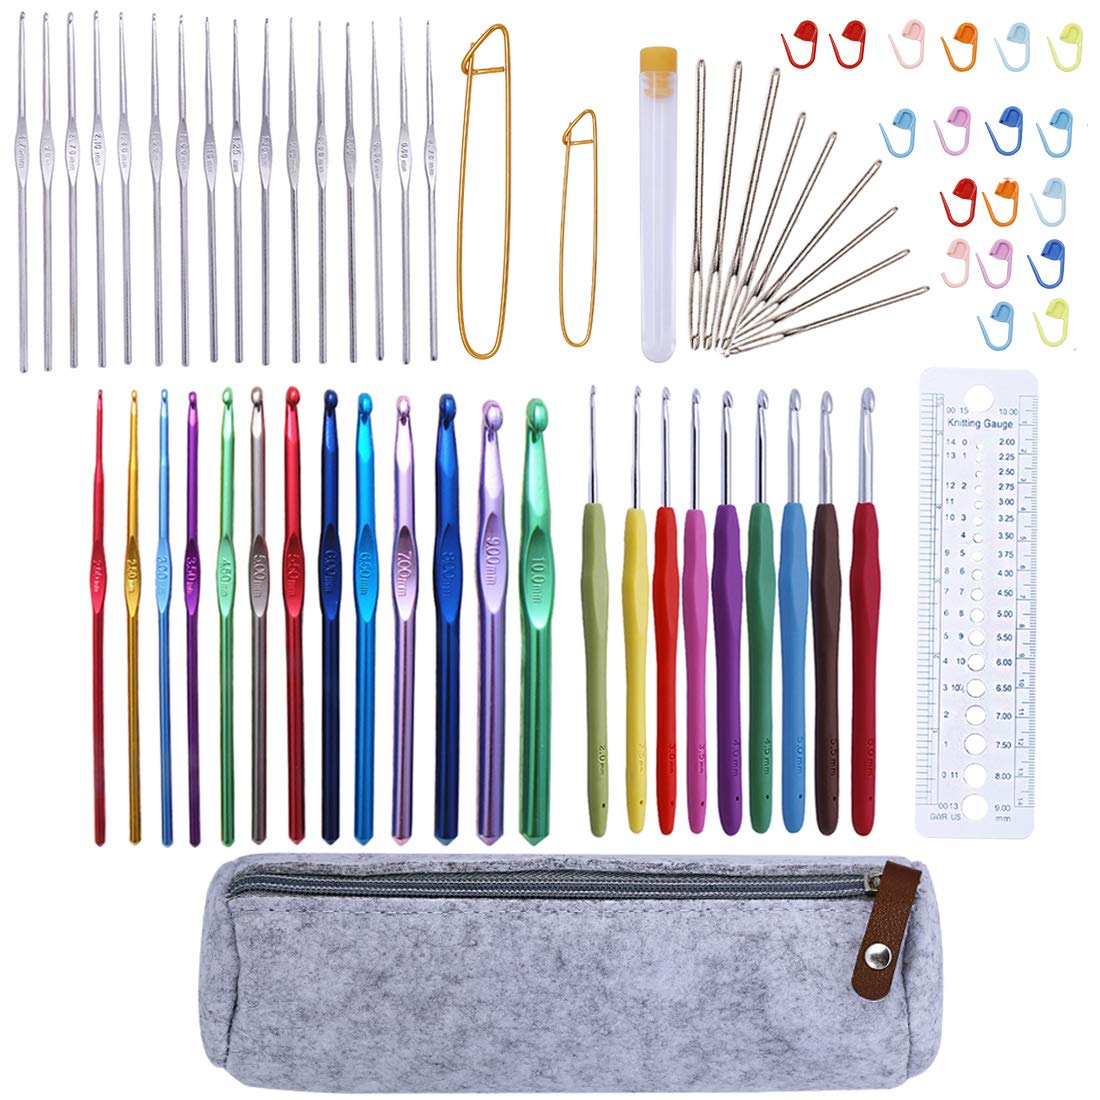 4 Crochet Hooks Set, Crochet hook kit Crochet Hooks with